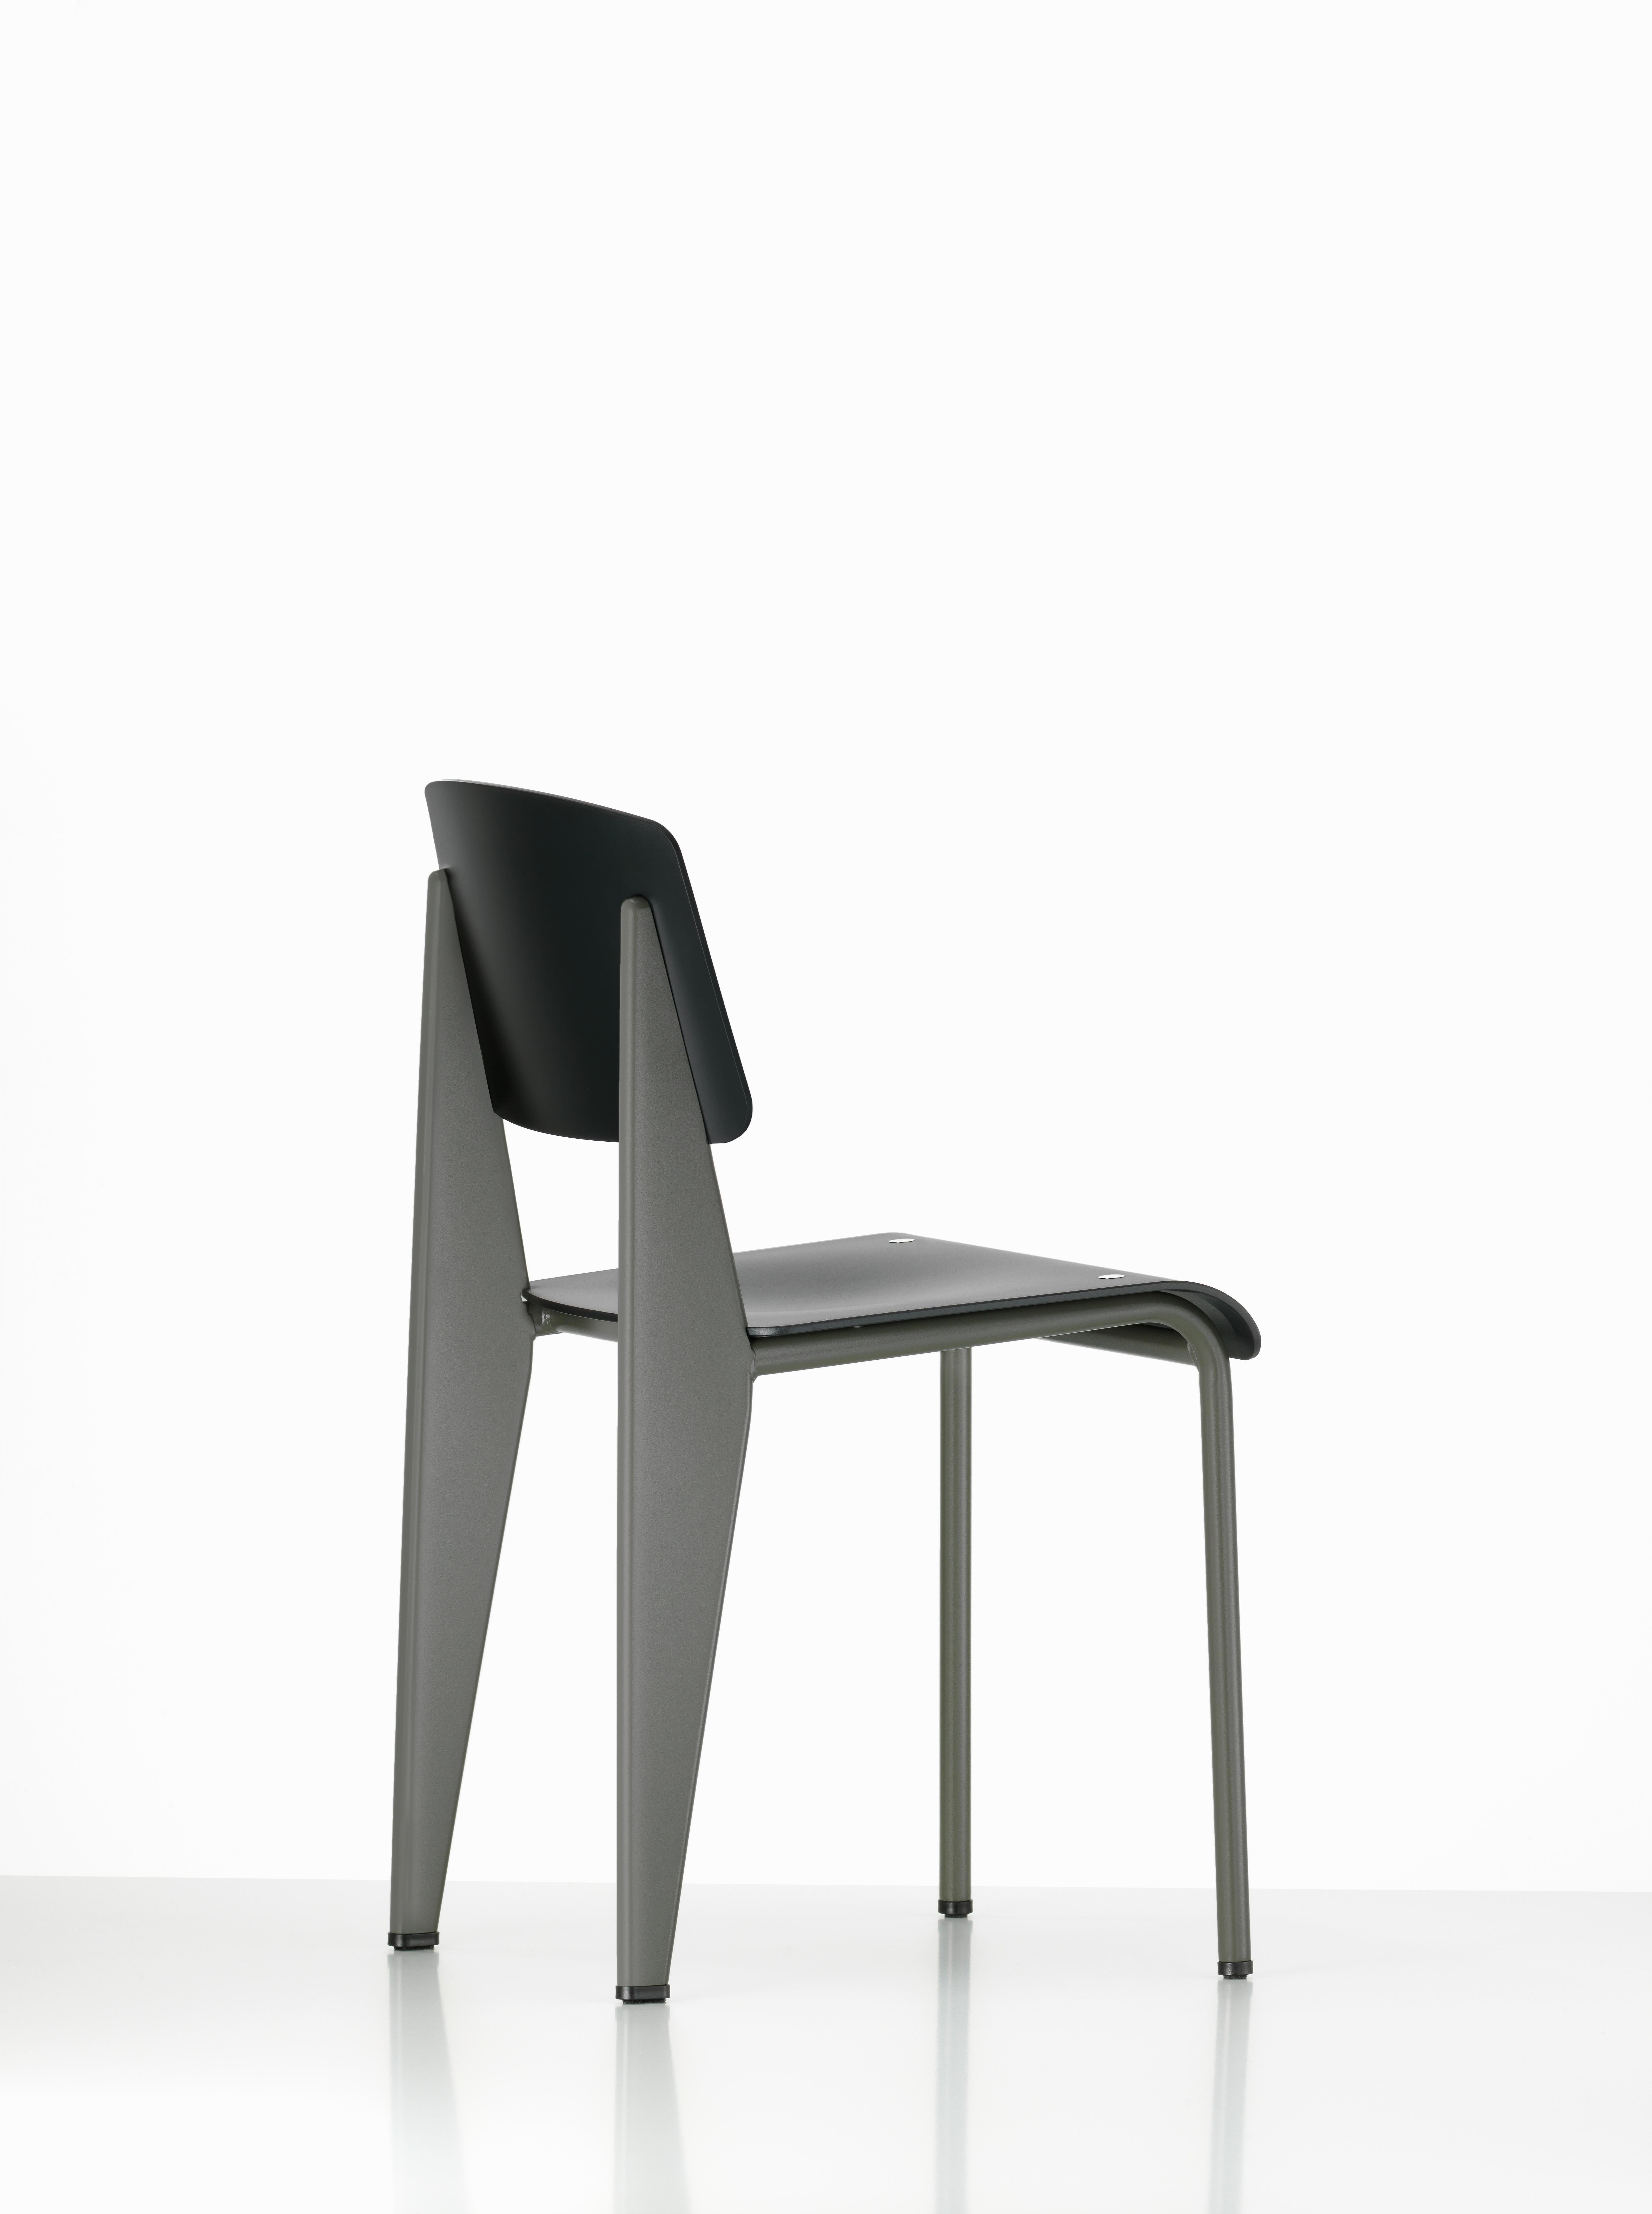 Jean Prouvé Standard Chair SP in Olive and Ecru White for Vitra 1